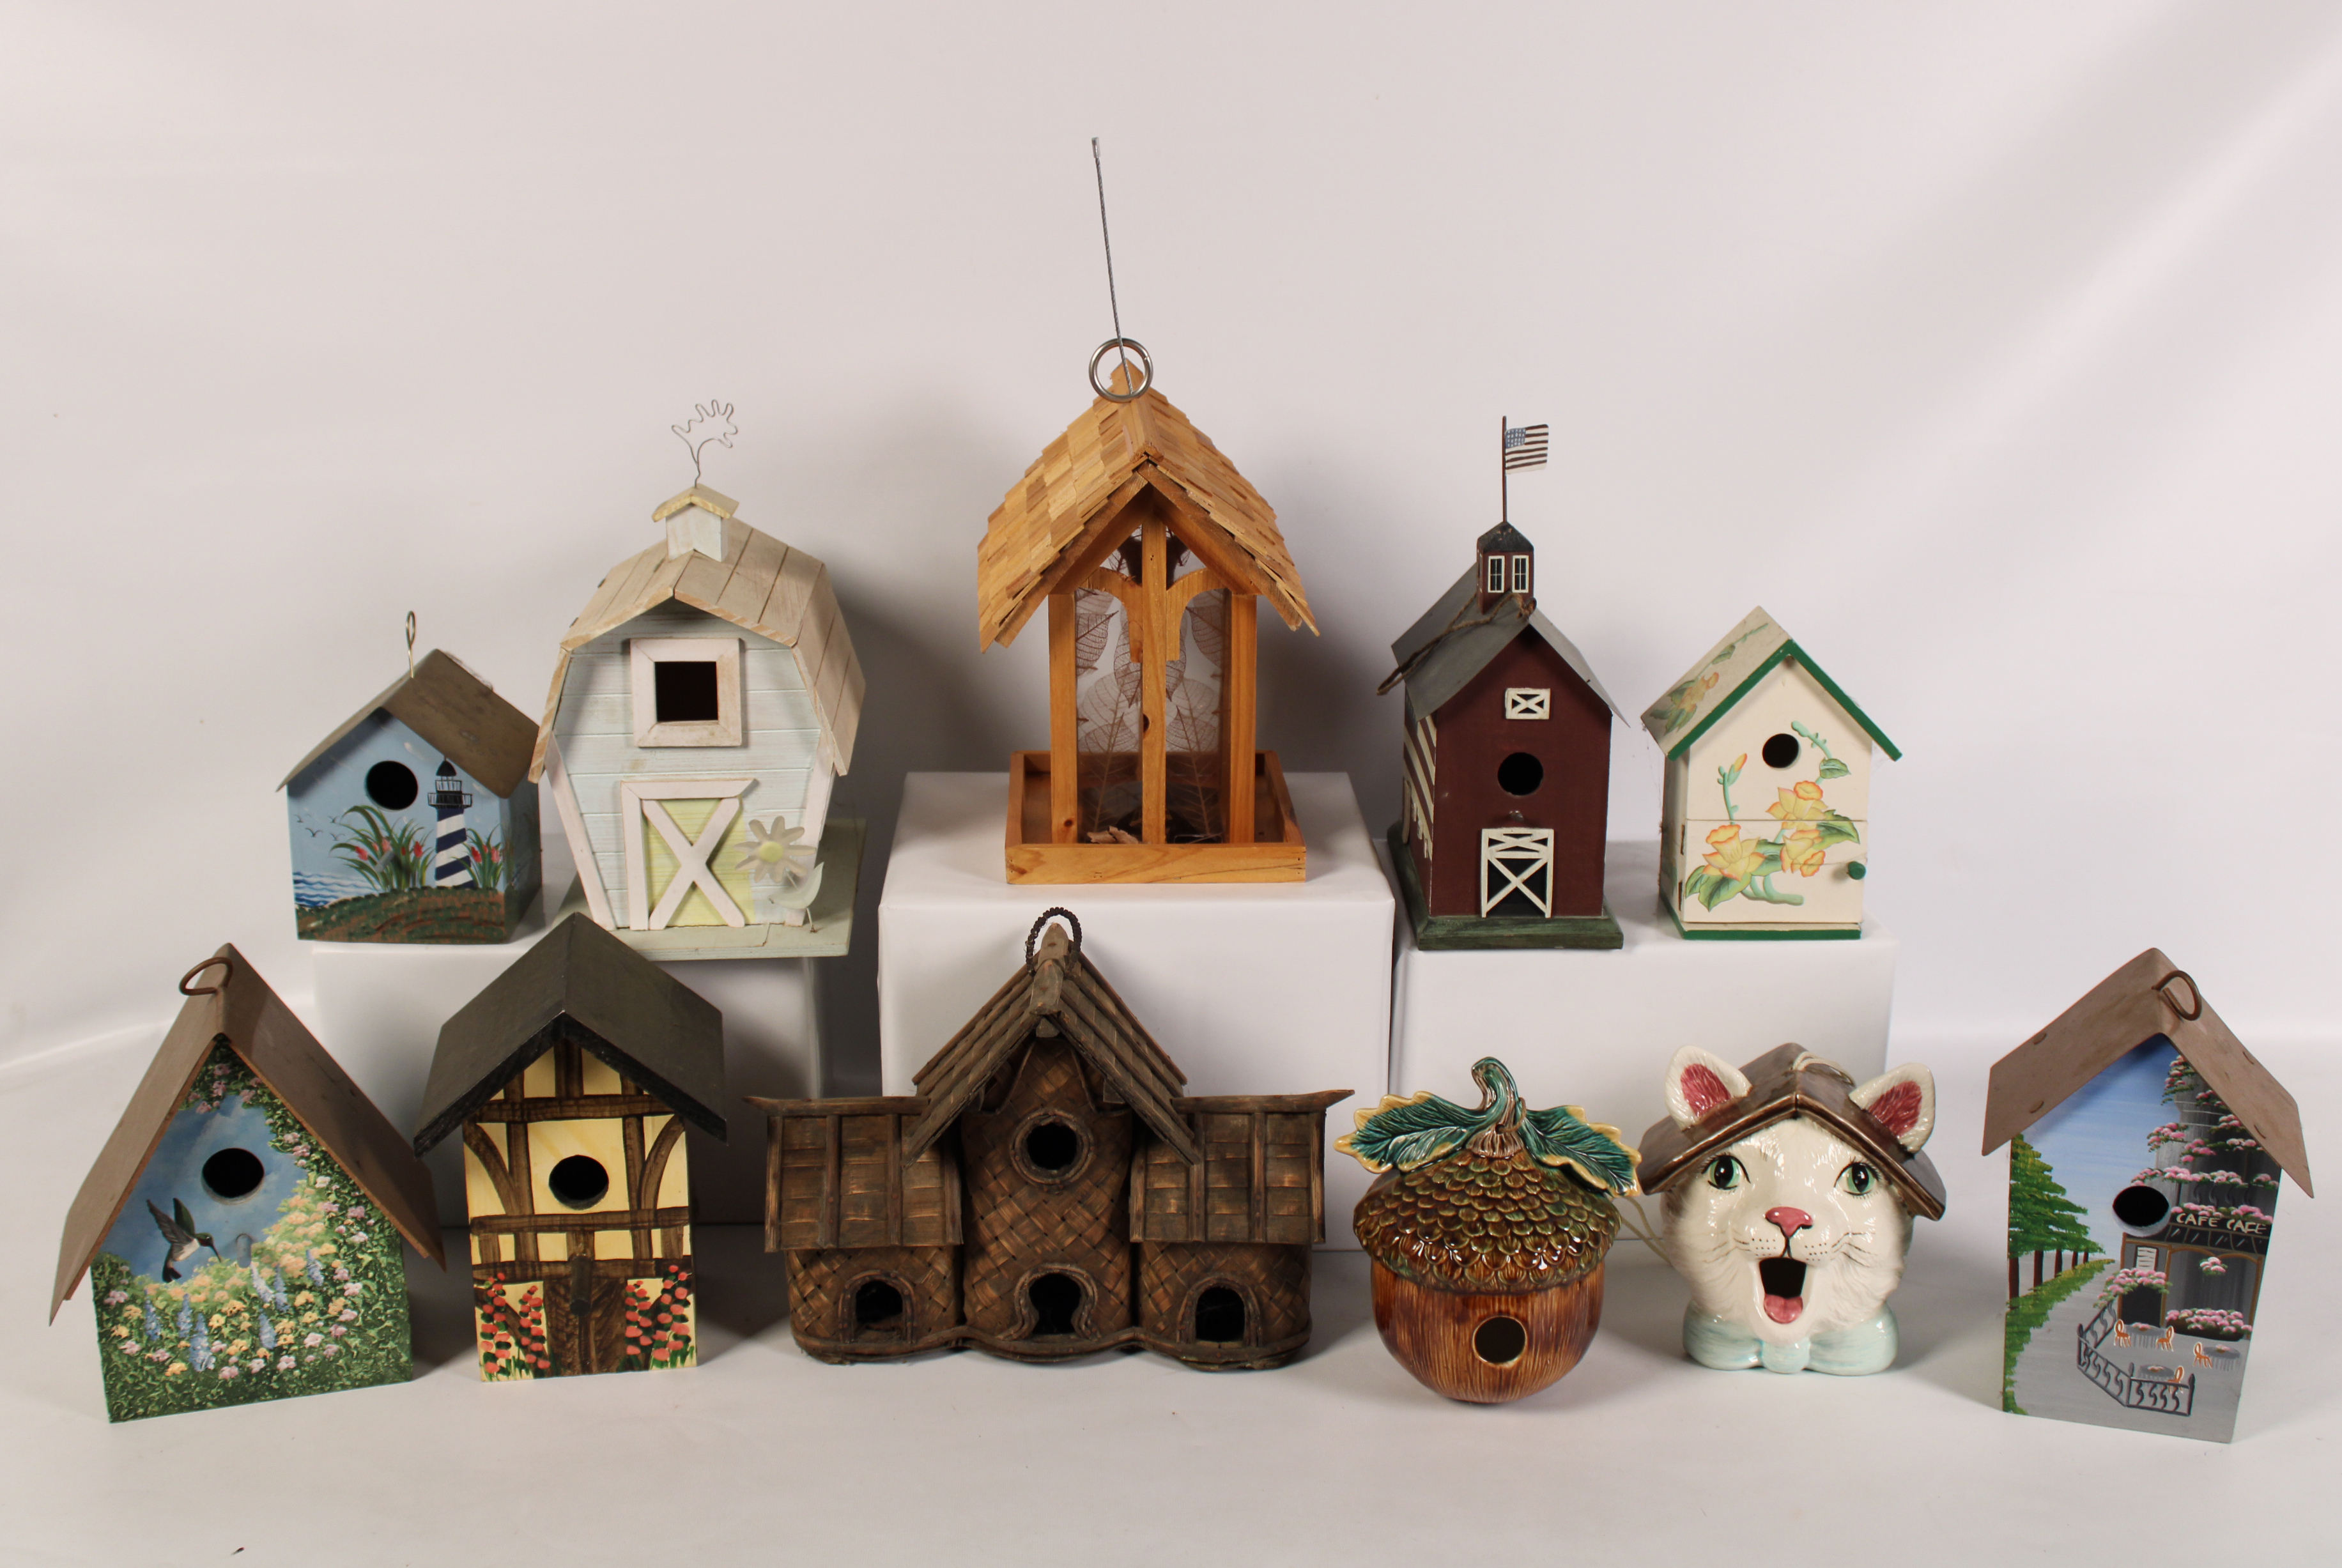 COLLECTION OF 11 BIRDHOUSES COLLECTION